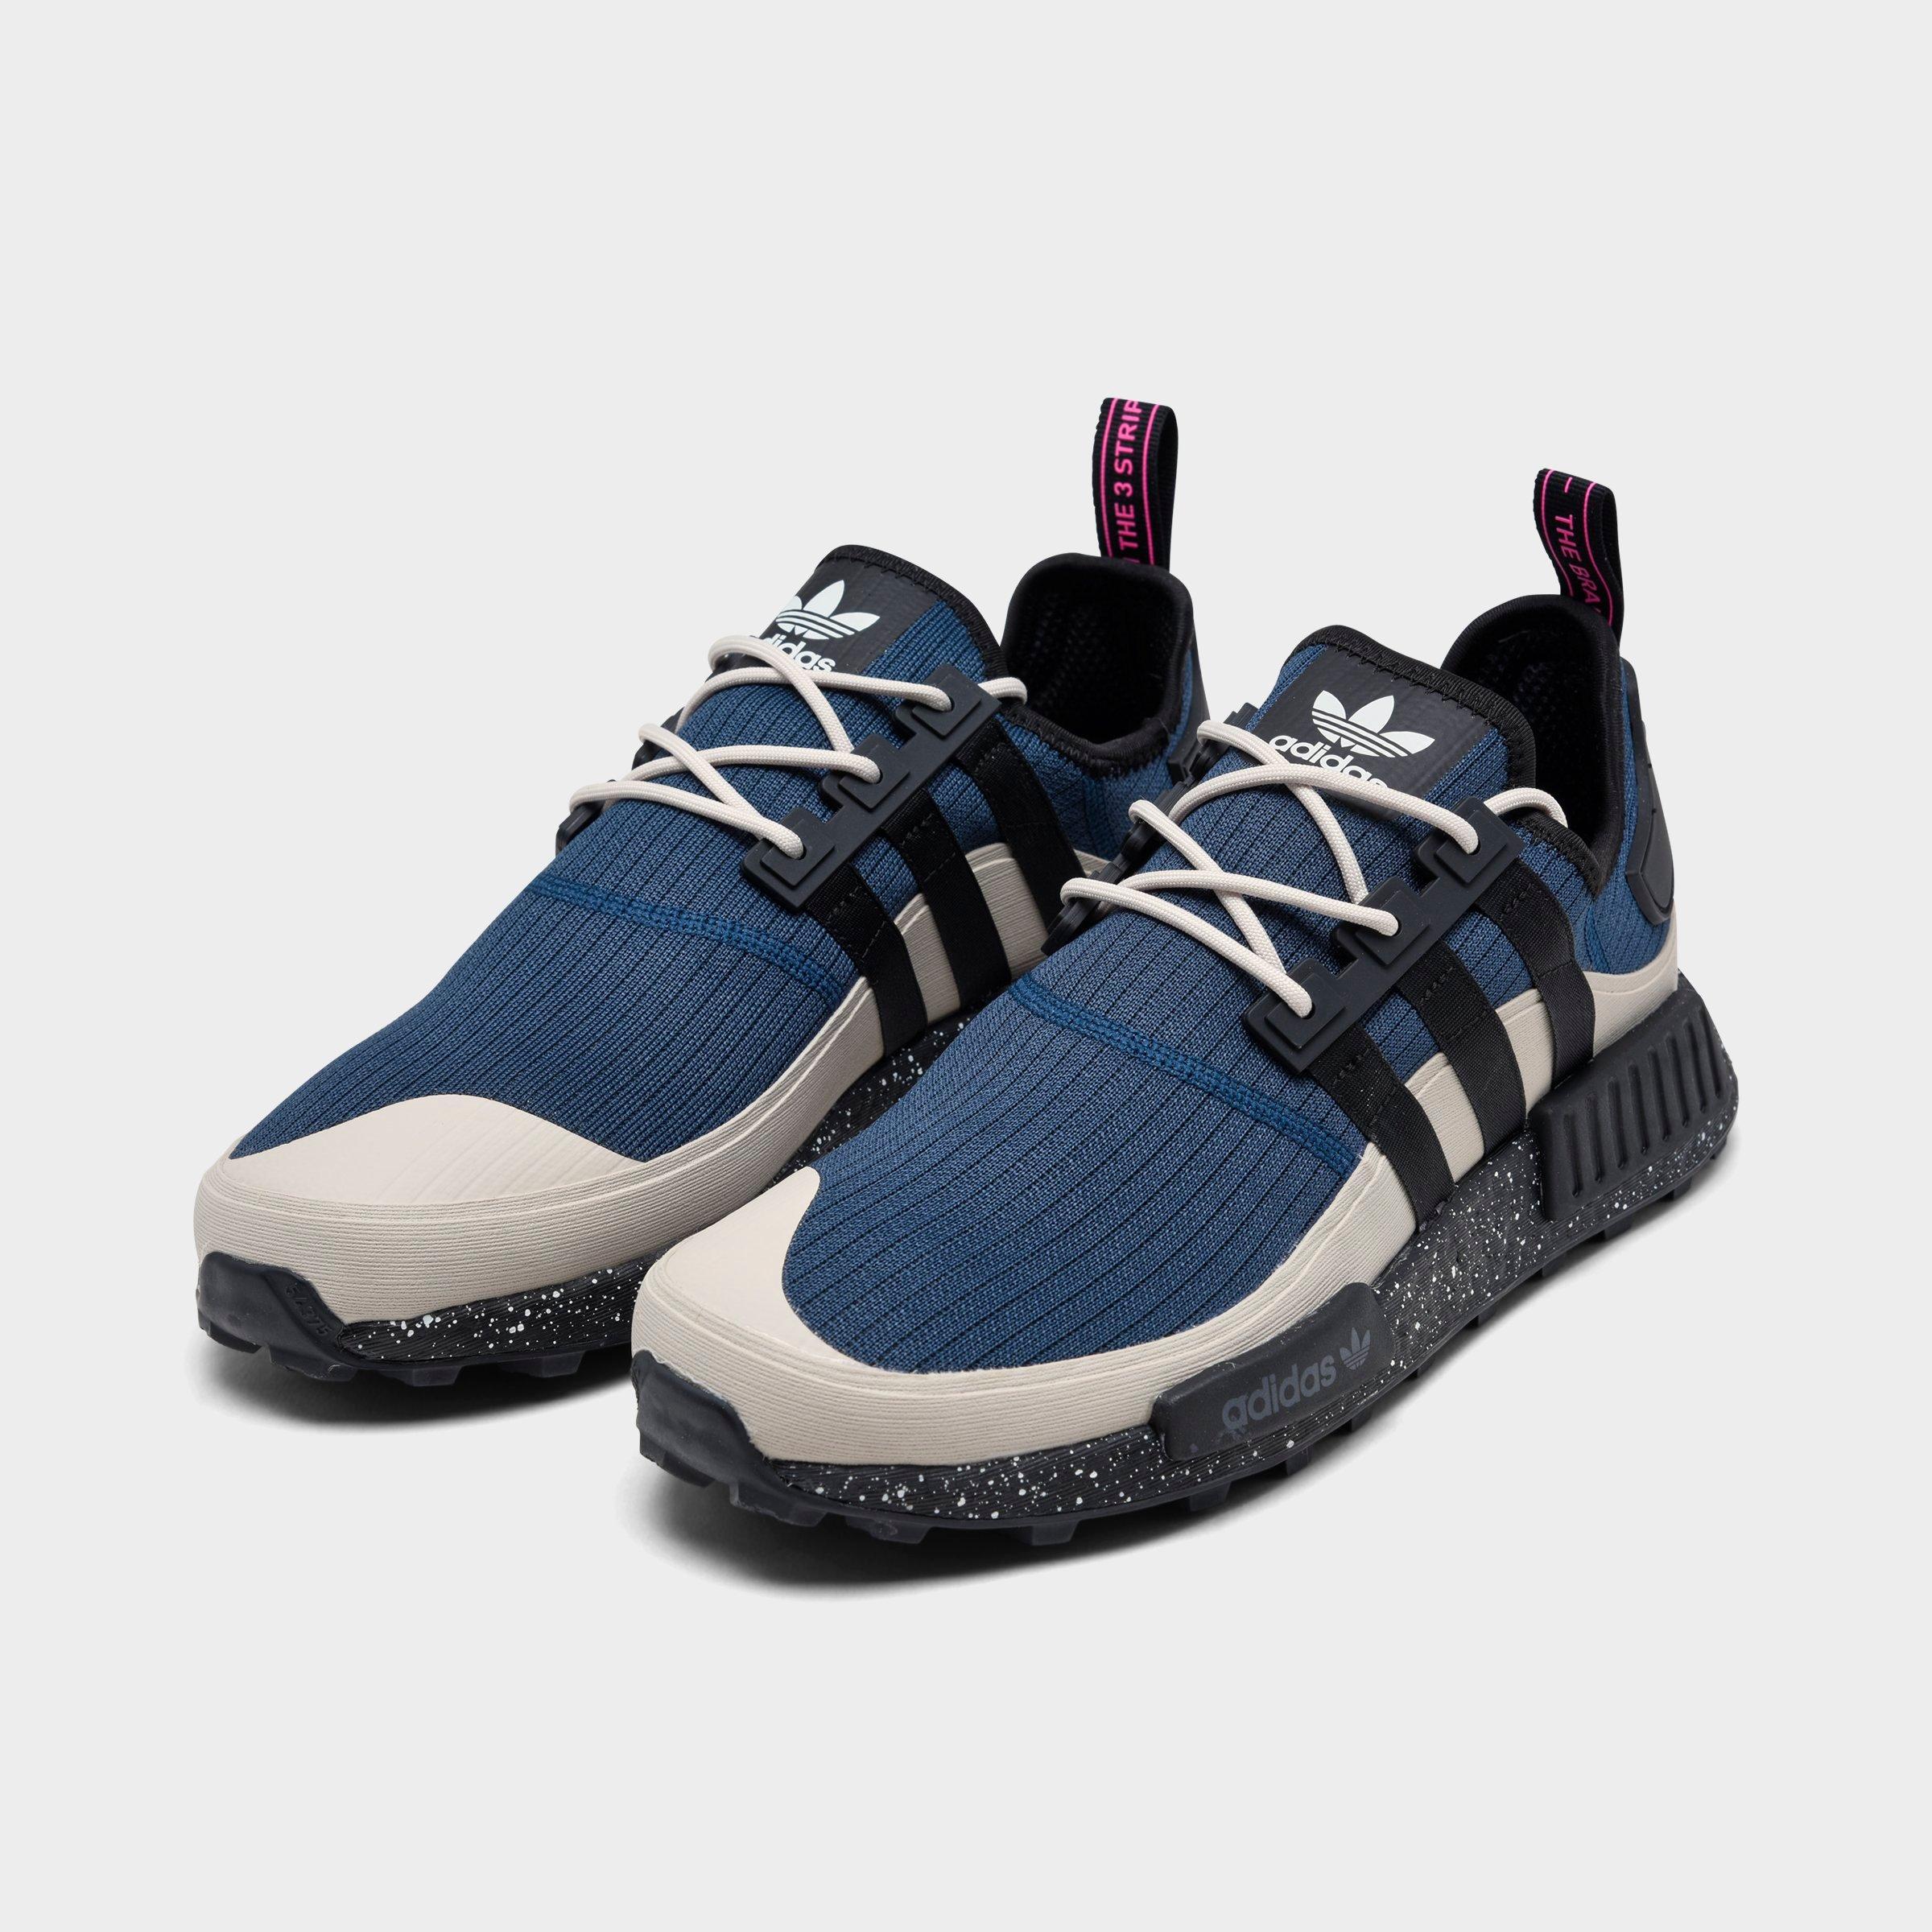 is adidas nmd for running